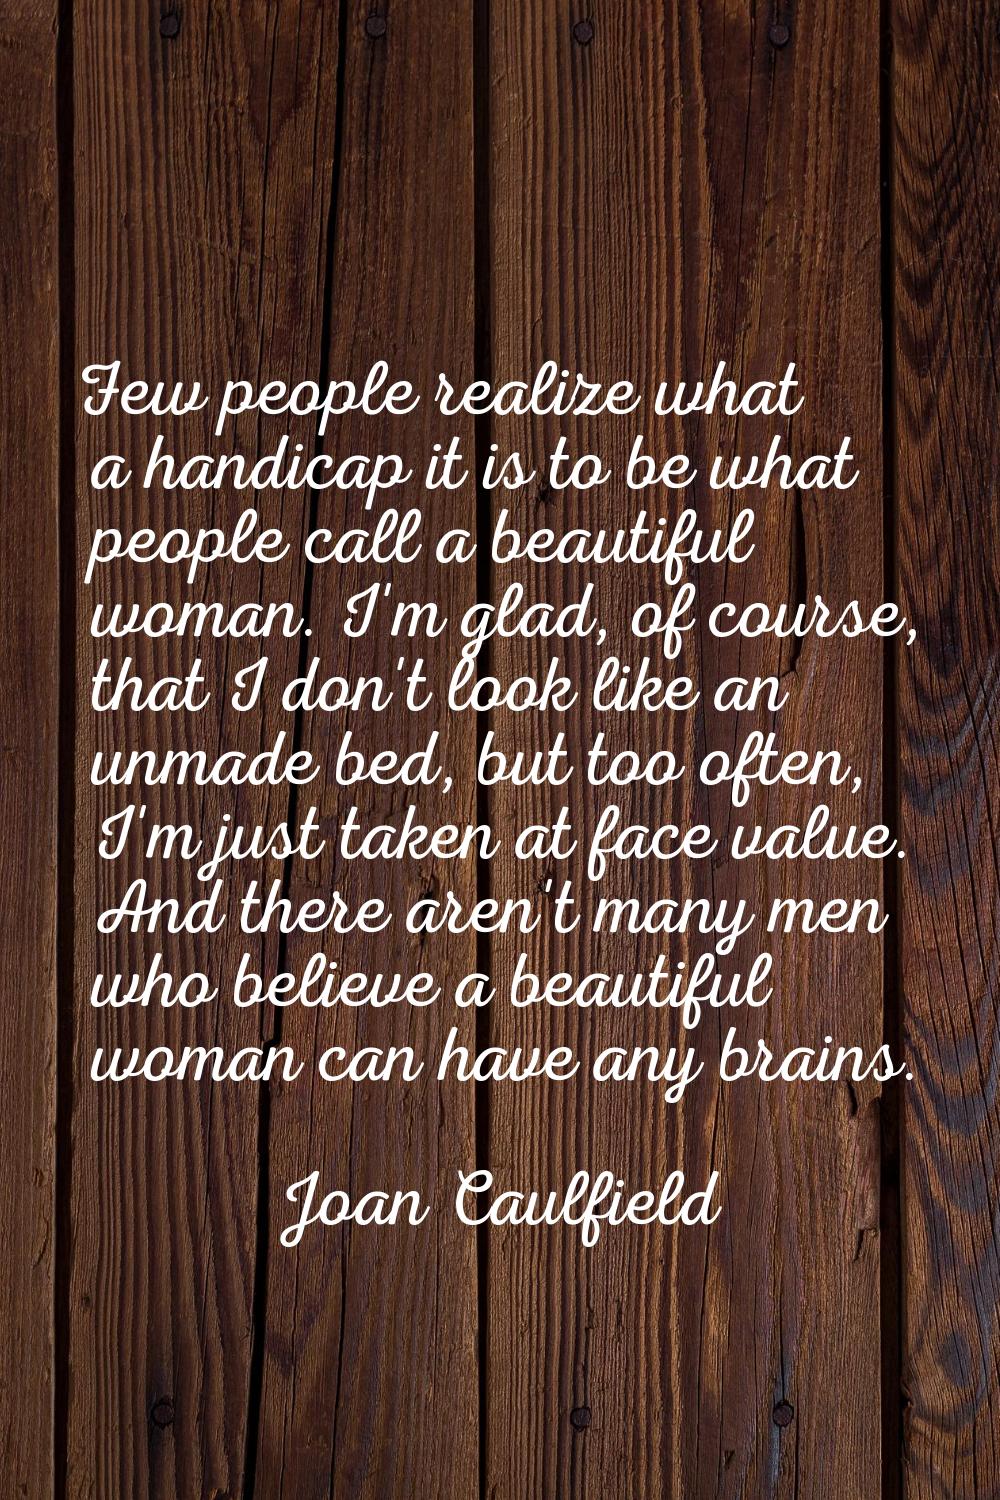 Few people realize what a handicap it is to be what people call a beautiful woman. I'm glad, of cou